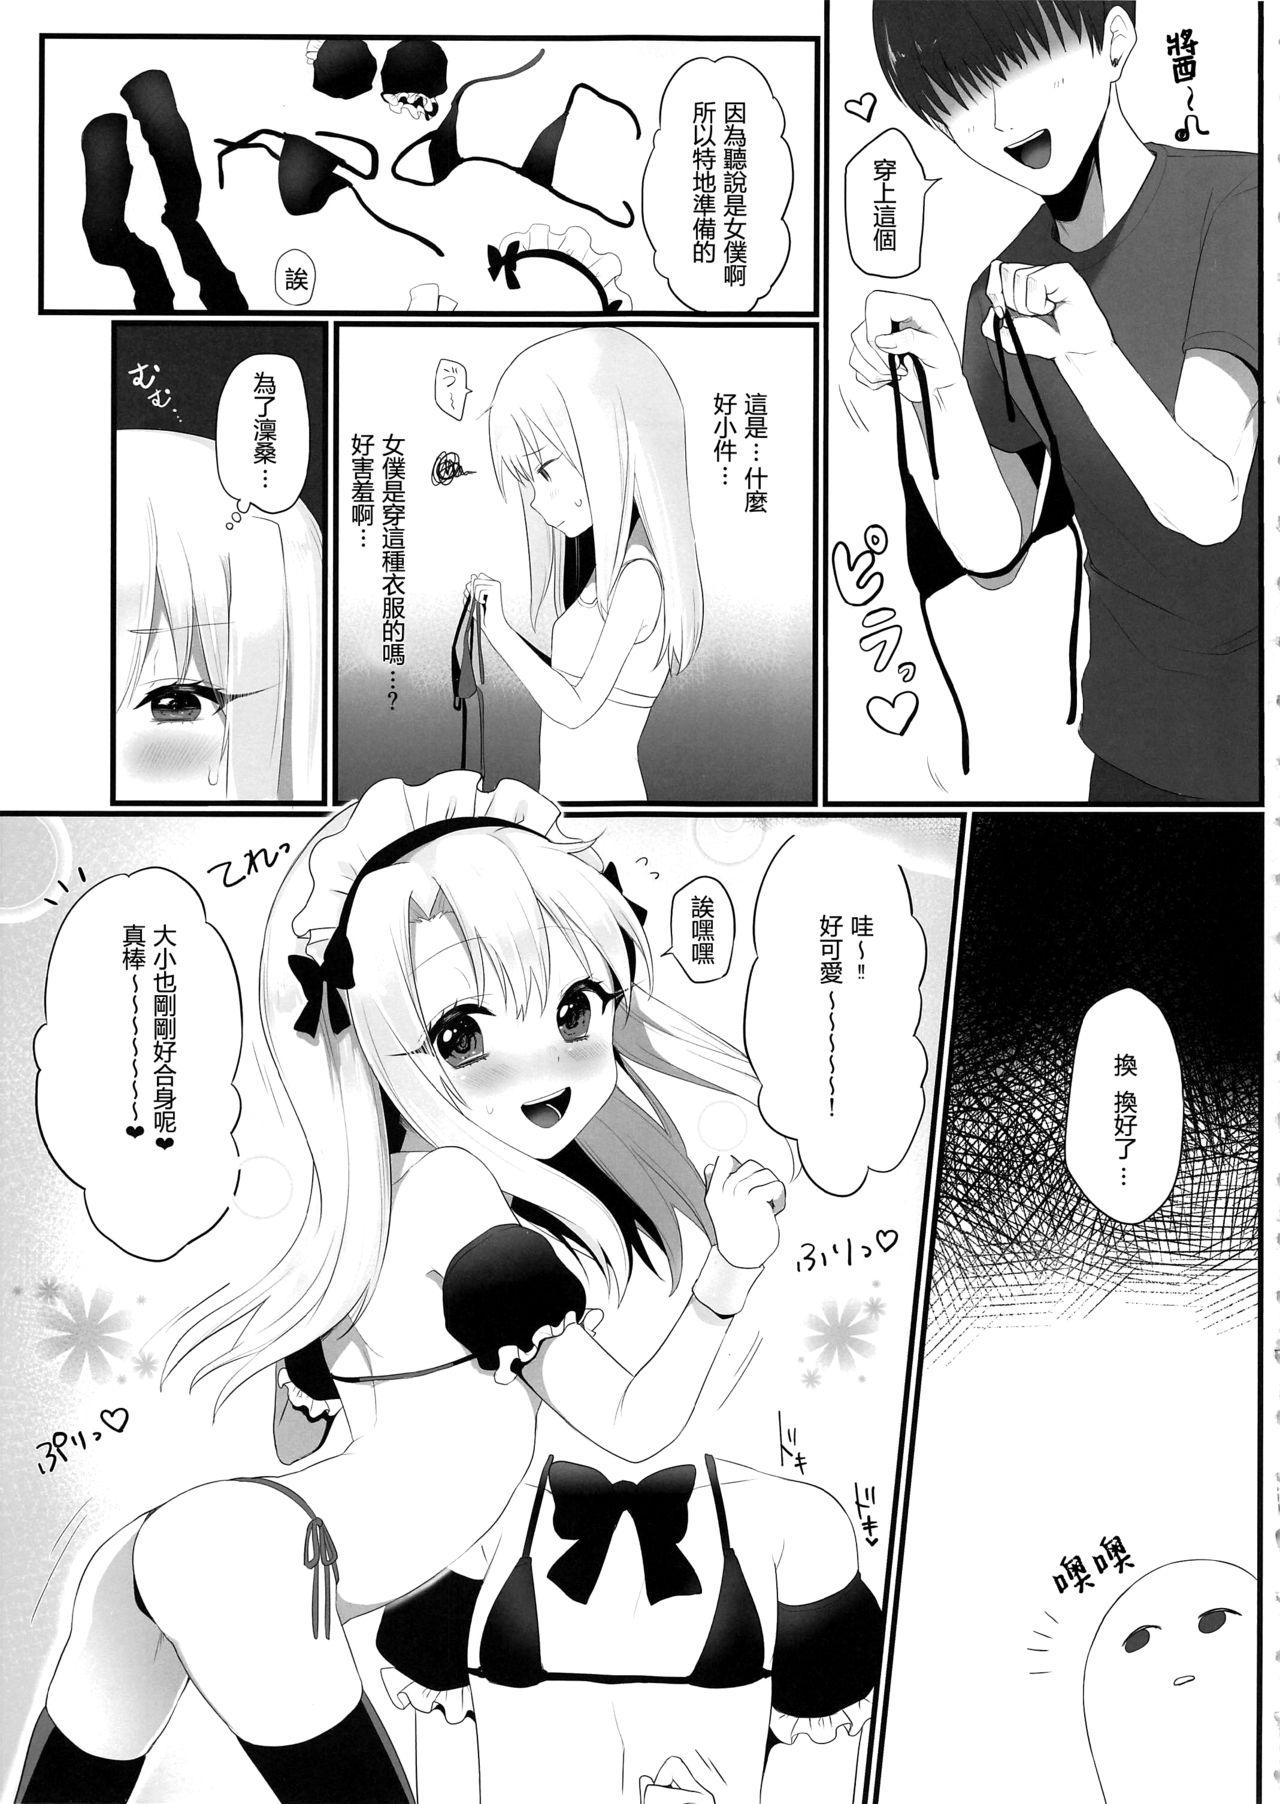 Friends Shucchou Mahou Shoujo Maid - Fate kaleid liner prisma illya Squirting - Page 9